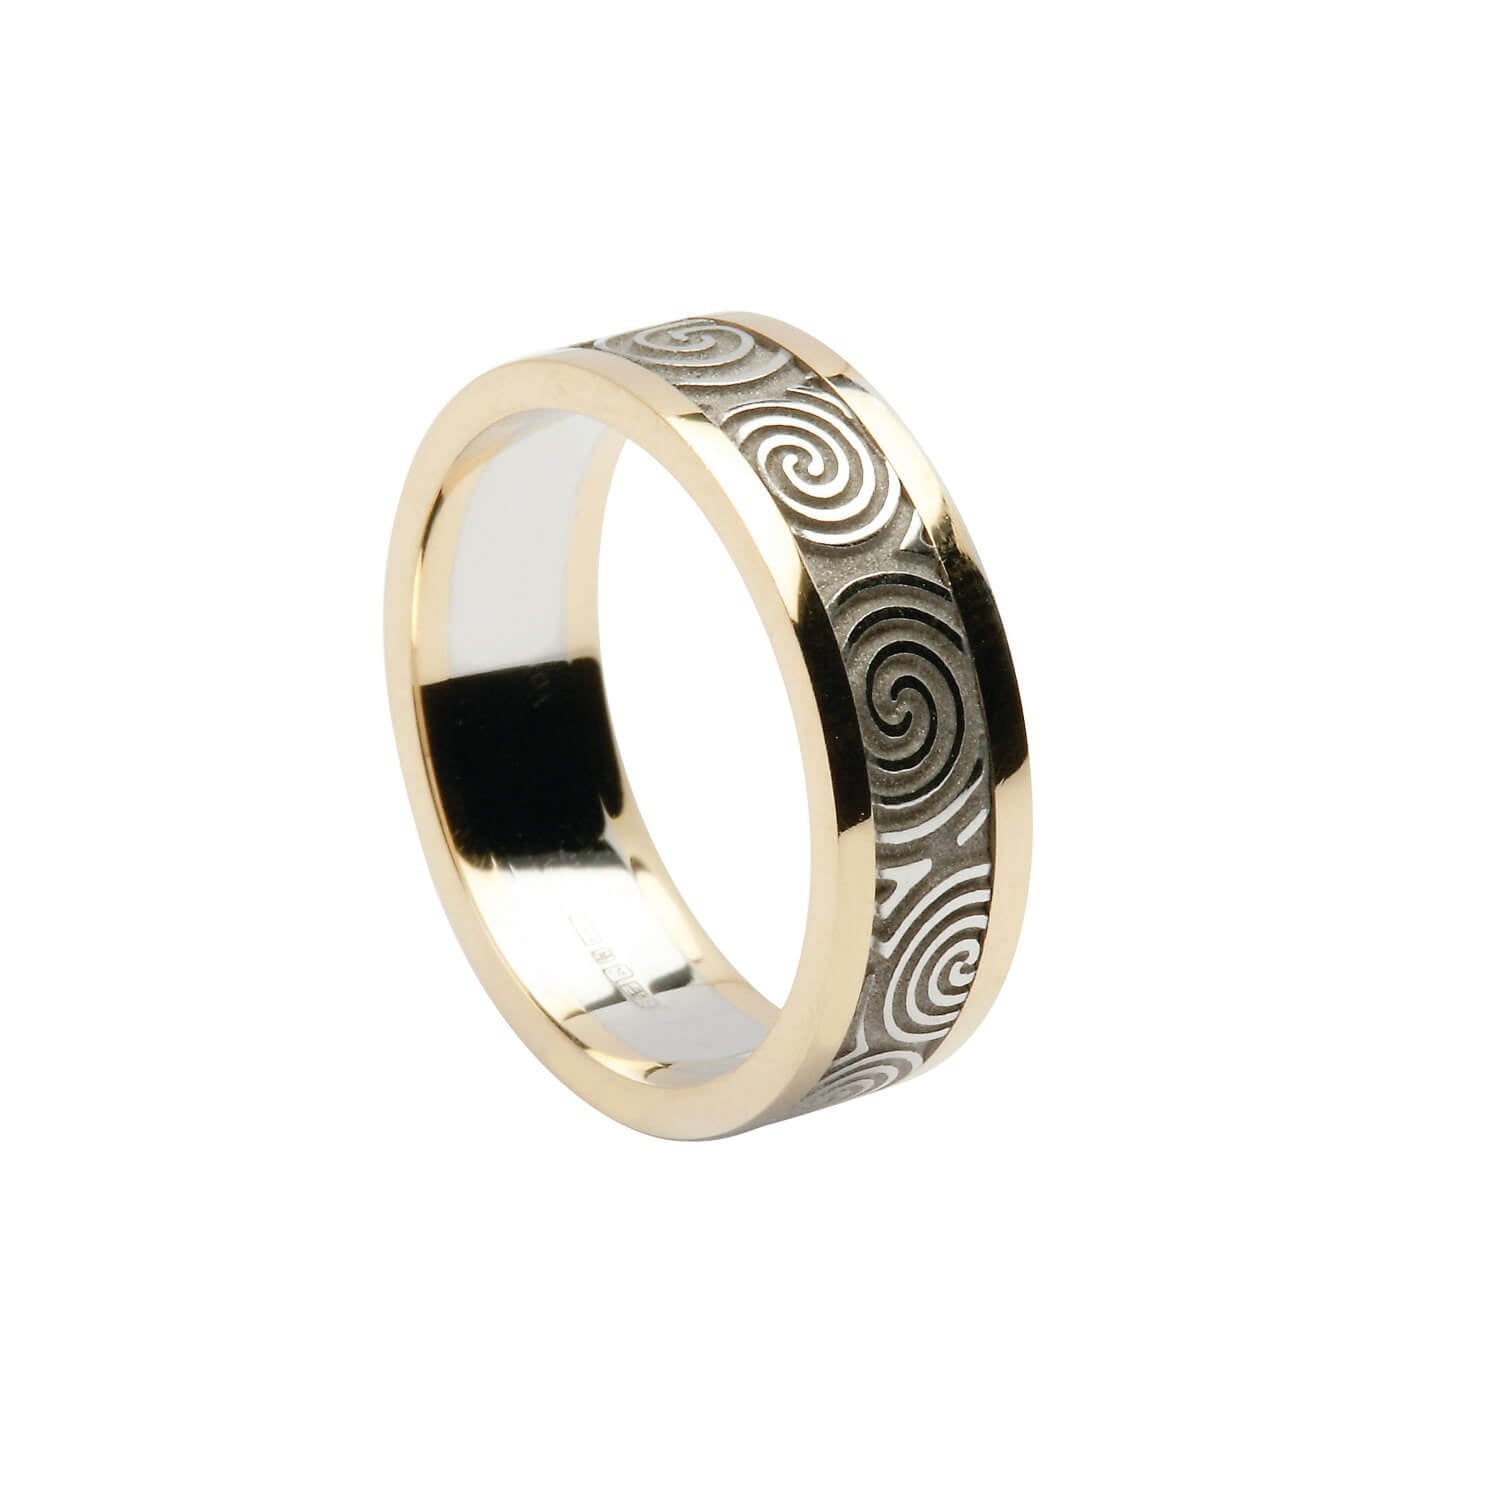 Ladies 14k White Gold Two Tone Celtic Wedding Ring with Trim